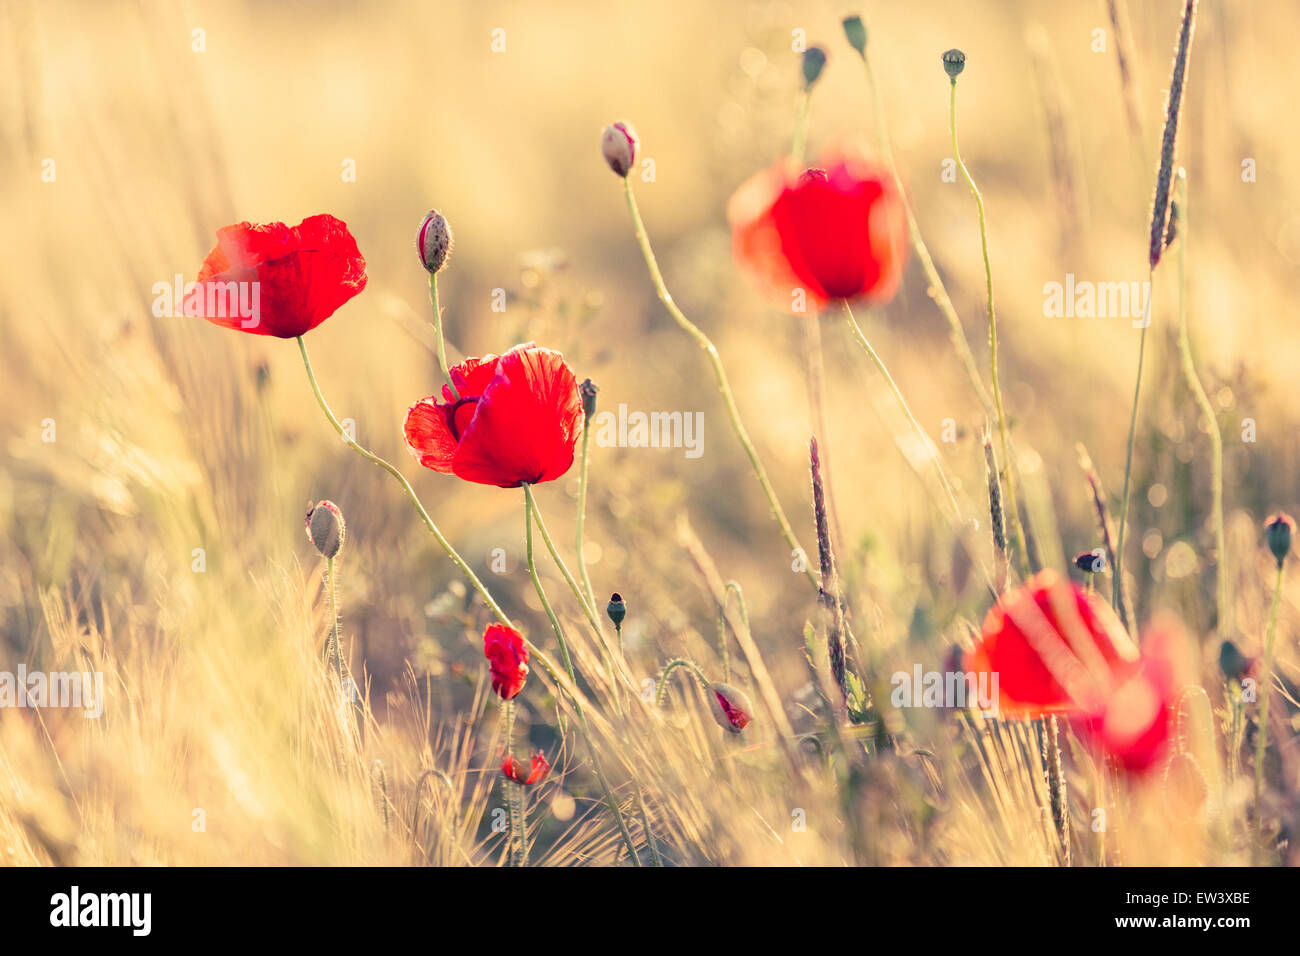 Close-up of Poppies in a field in summer with warm golden sunlight and a blurred background. It's summertime! Stock Photo